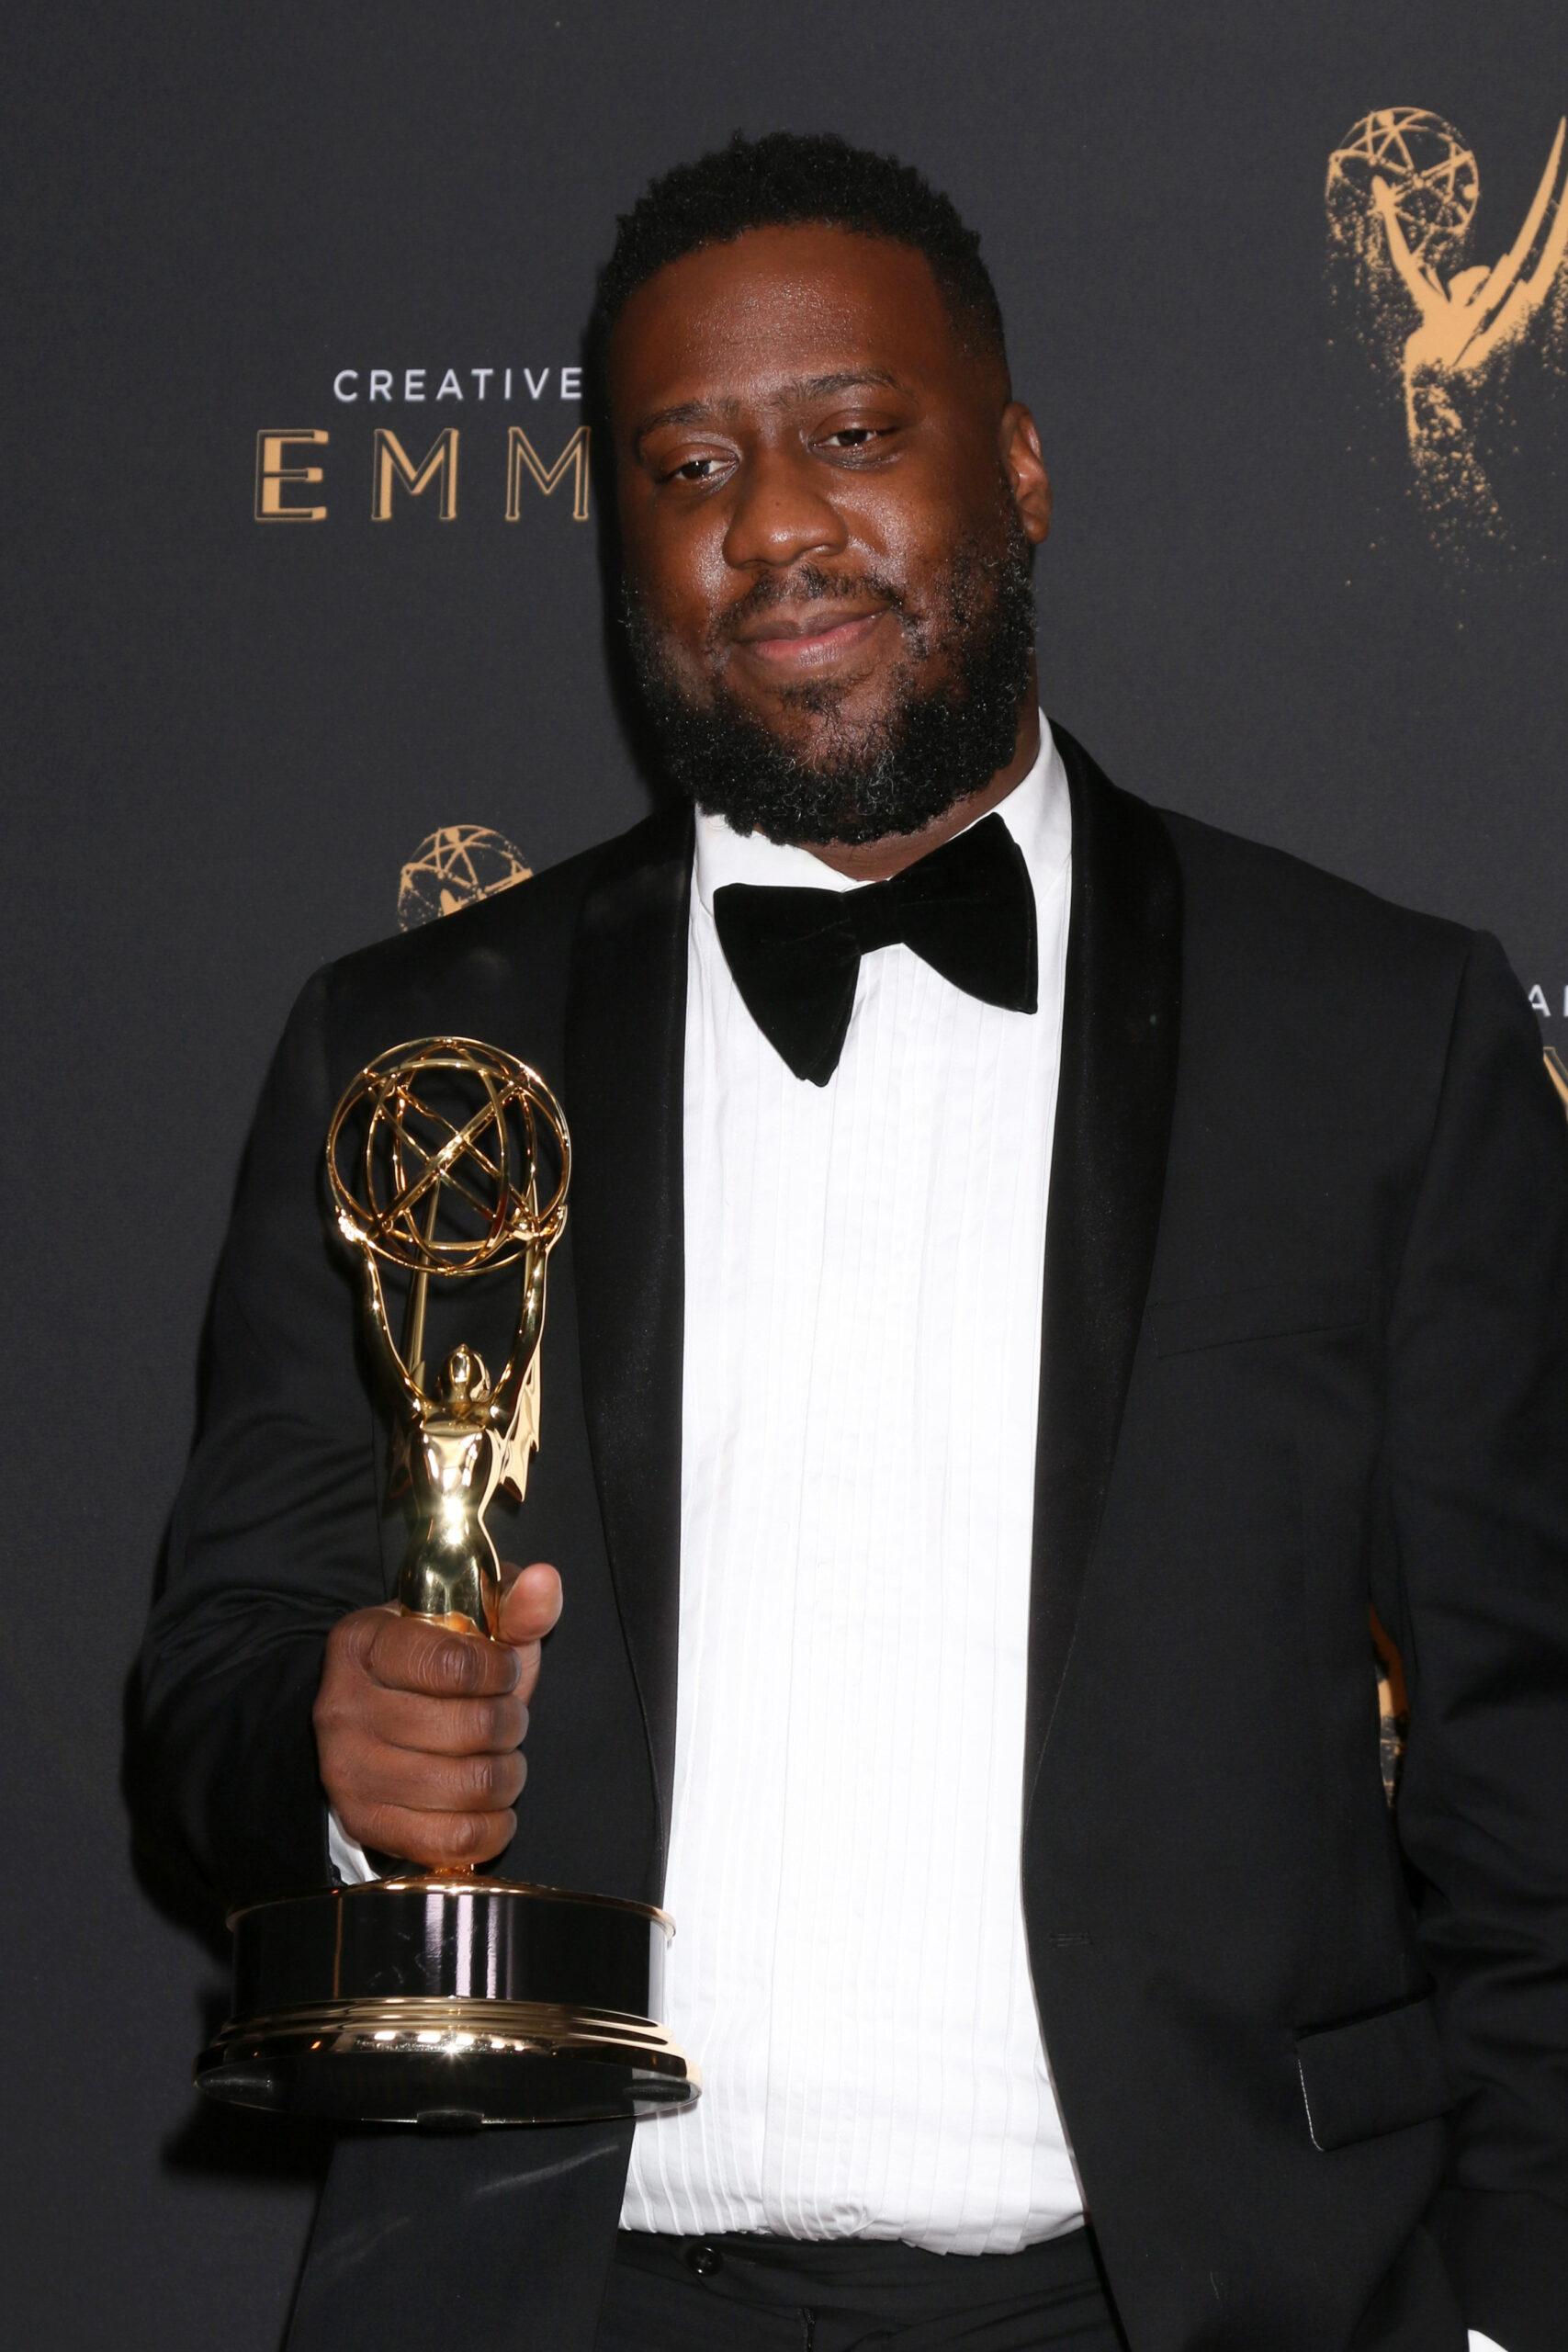 Robert Glasper at the 2017 Creative Emmy Awards Press Room at the Microsoft Theater on September 9, 2017 in Los Angeles